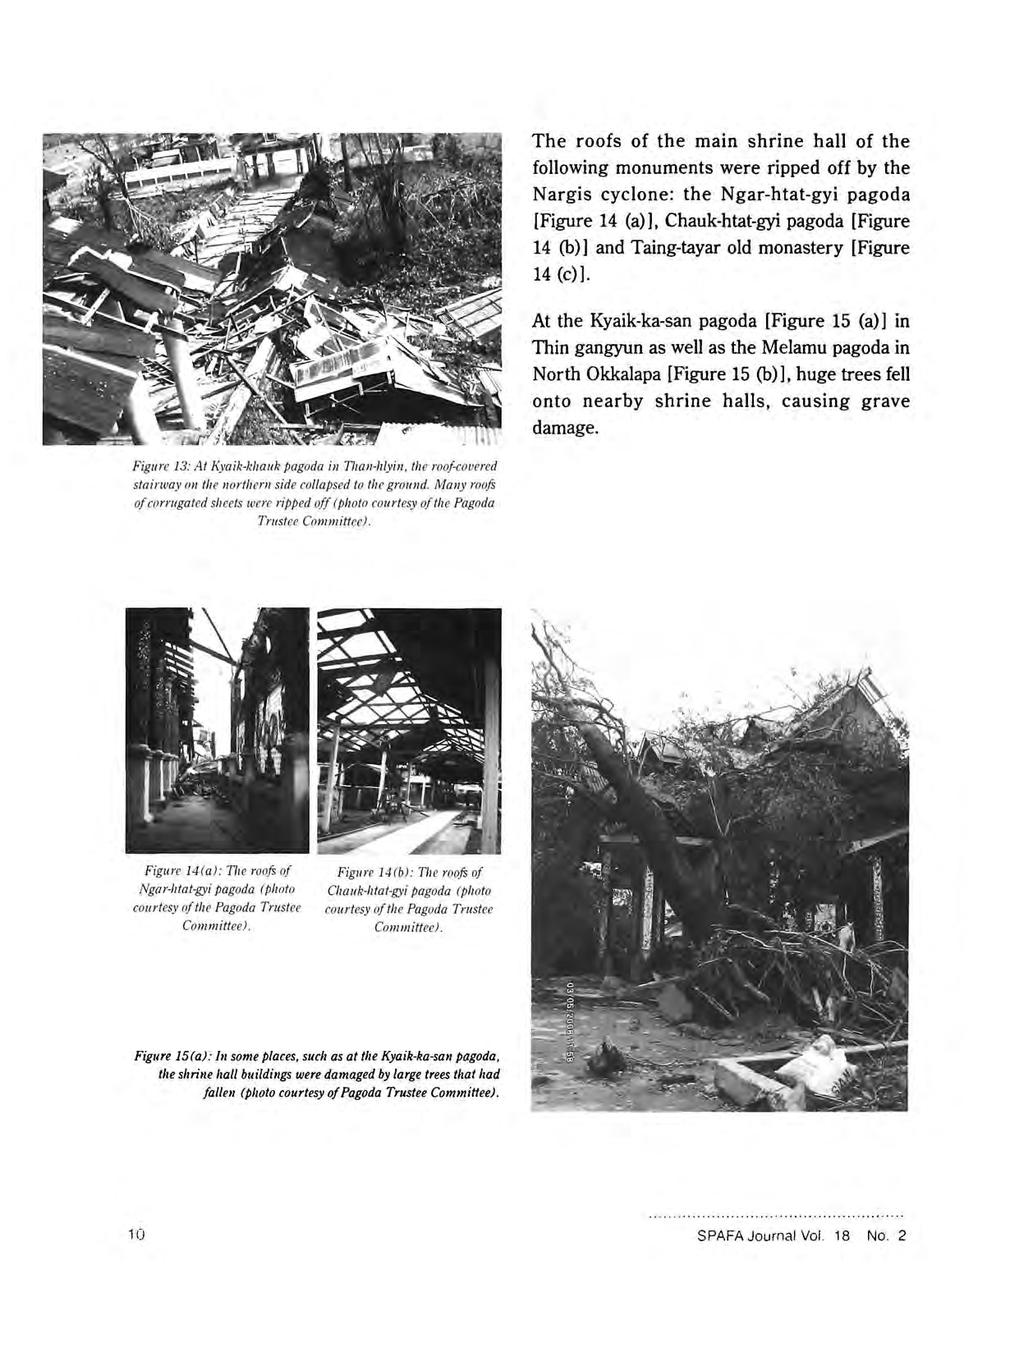 The roofs of the main shrine hall of the following monuments were ripped off by the Nargis cyclone: the Ngar-htat-gyi pagoda [Figure 14 (a)], Chauk-htat-gyi pagoda [Figure 14 (b)] and Taing-tayar old